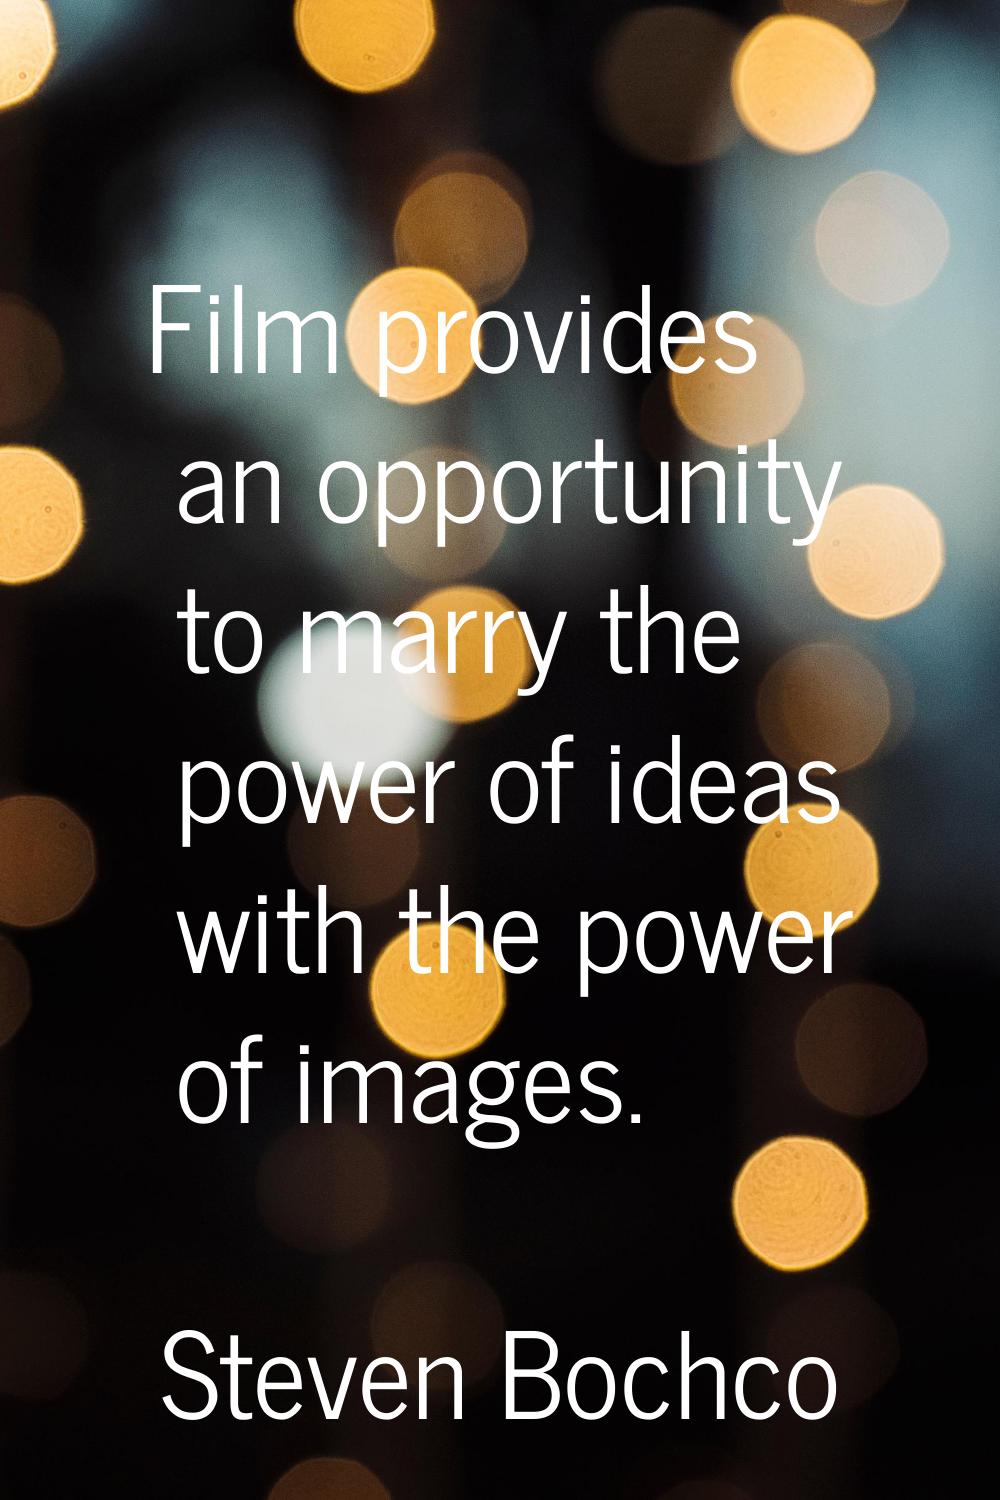 Film provides an opportunity to marry the power of ideas with the power of images.